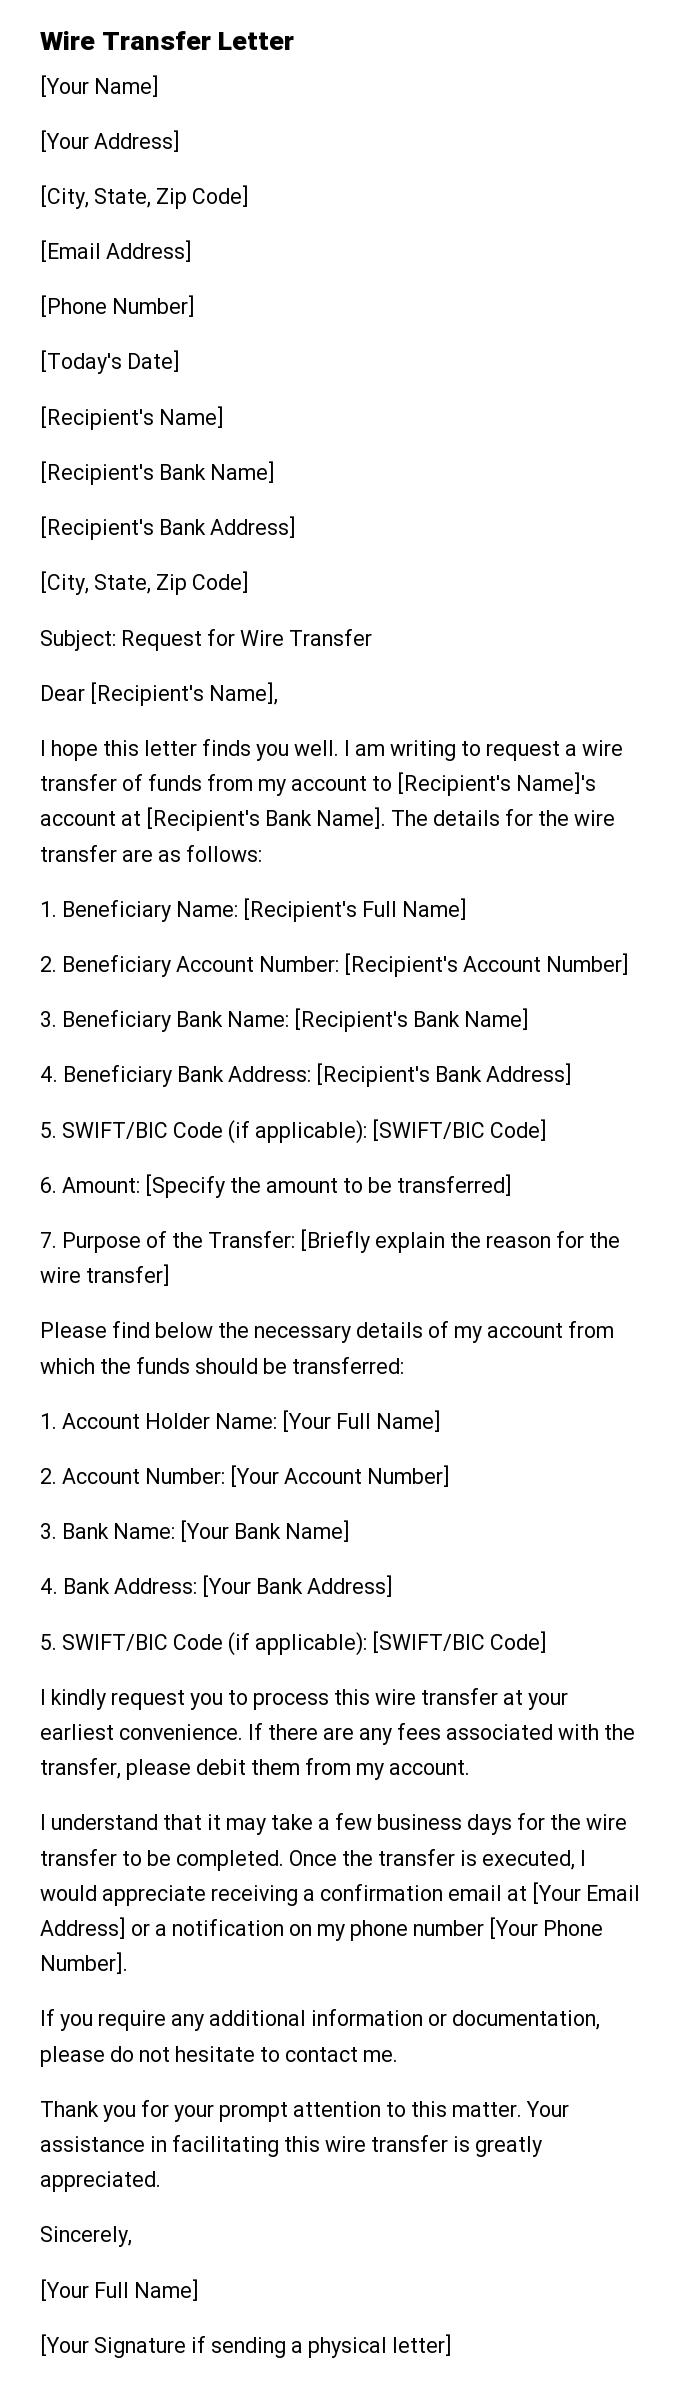 Wire Transfer Letter